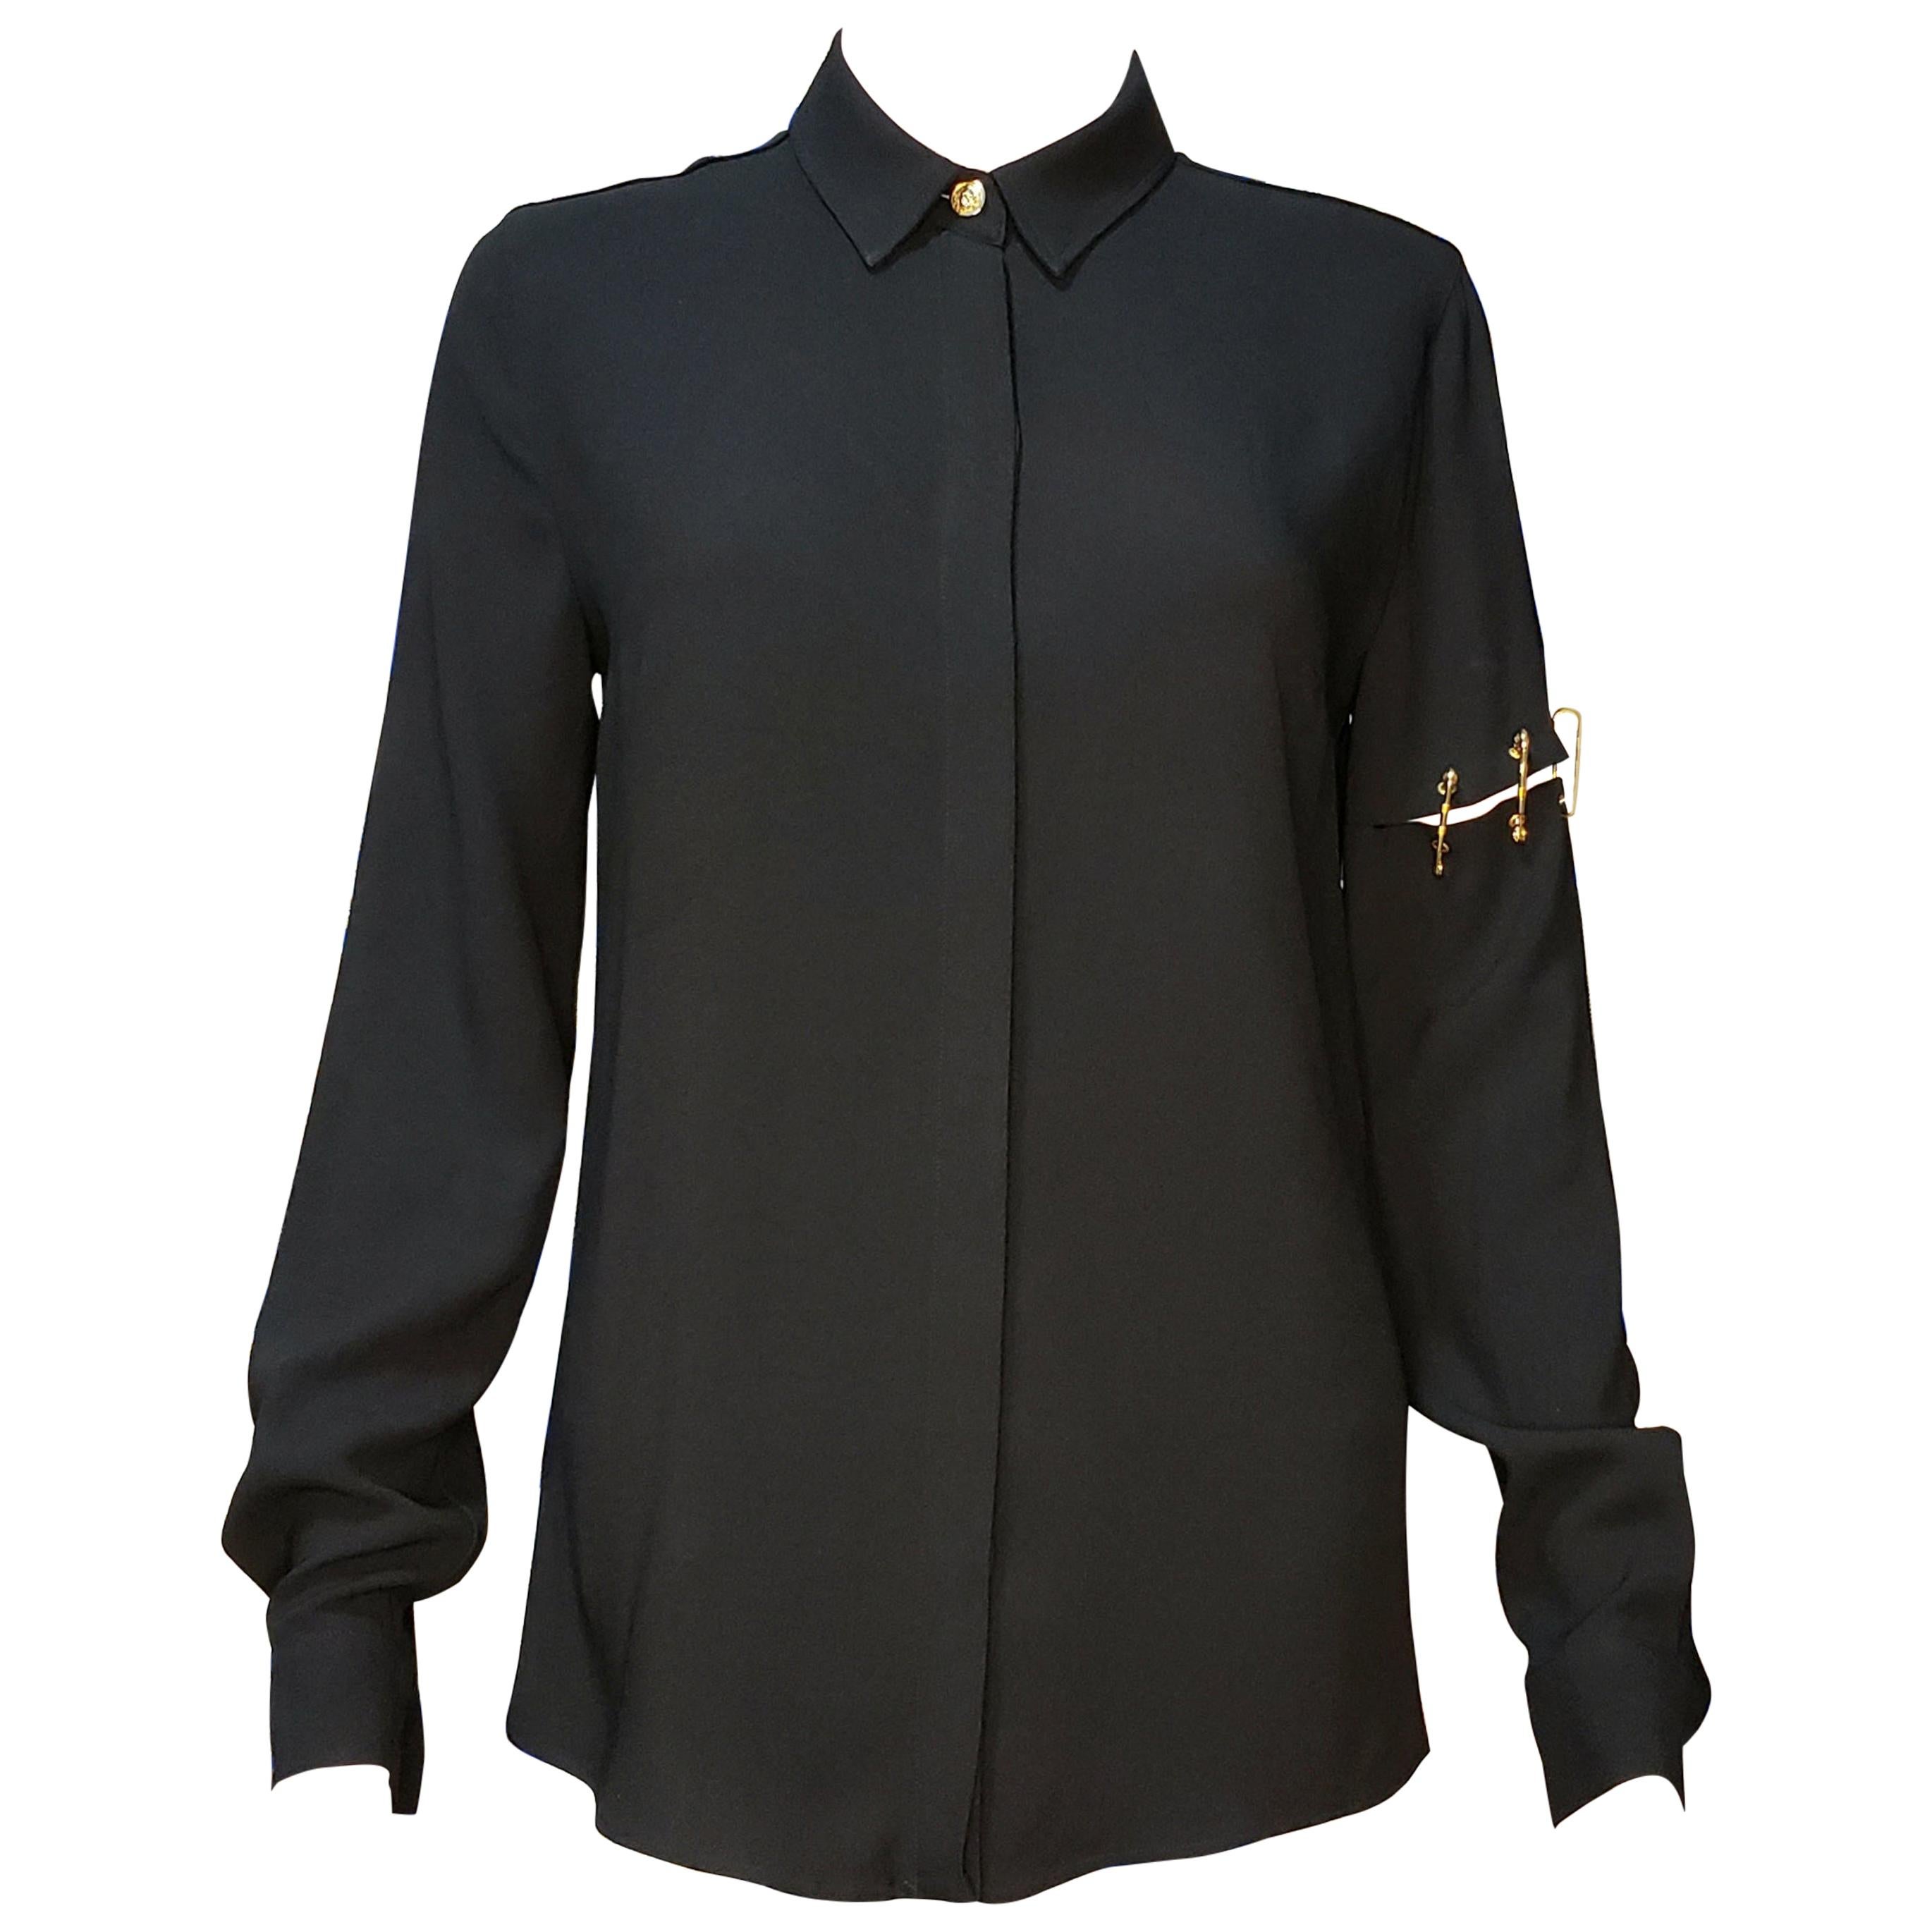 VERSUS VERSACE BLACK LONG SLEEVE SHIRT with GOLD-TONE LION PINS 38 - 2 For Sale